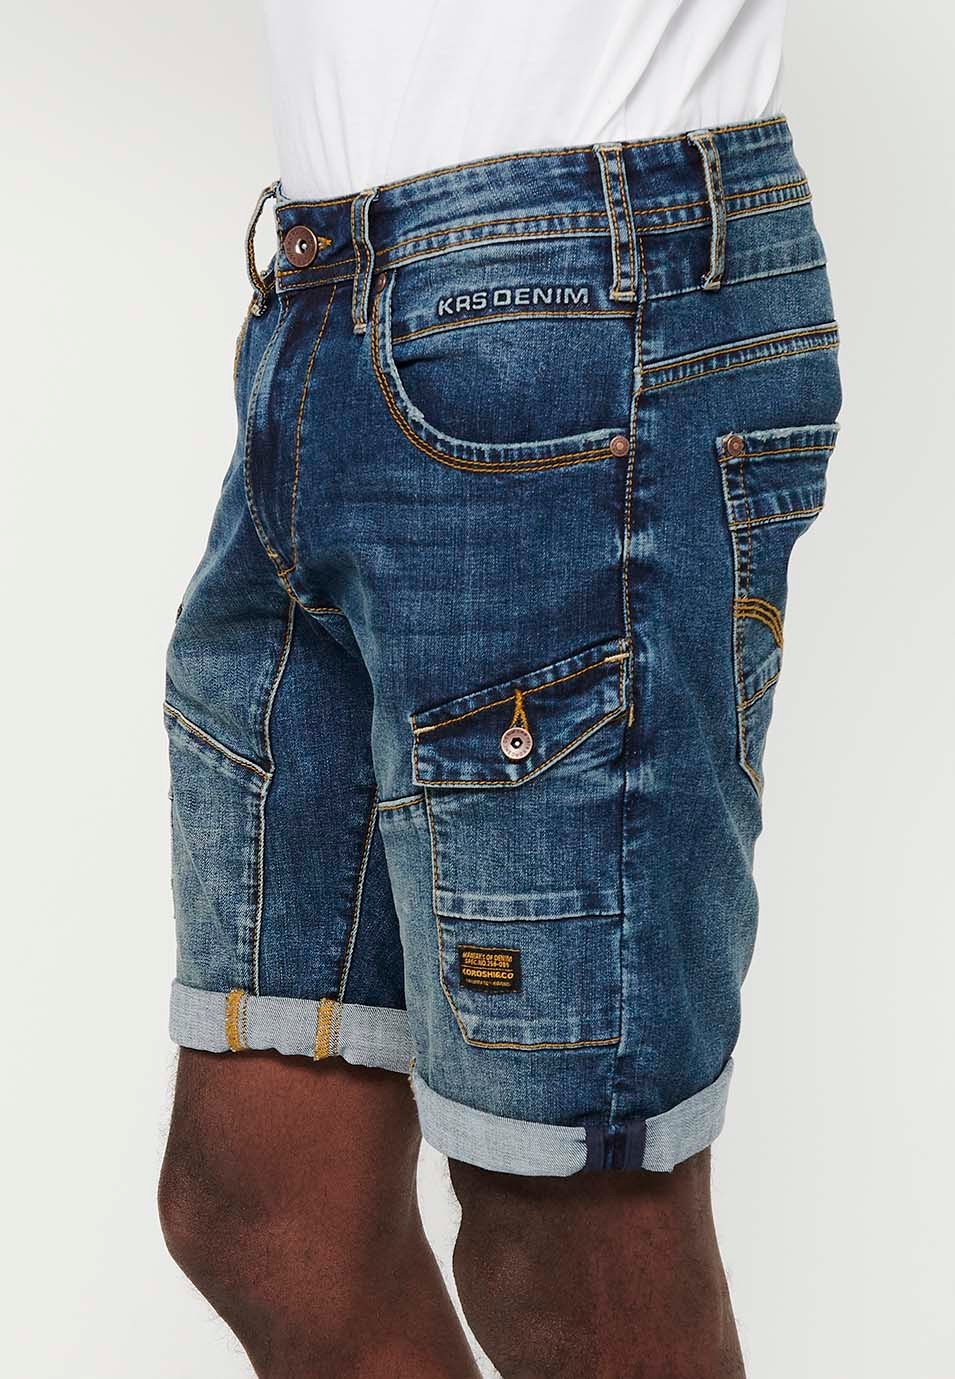 Denim Bermuda Shorts with Turn-Up Finish and Front Zipper and Button Closure with Five Pockets, One Pocket Pocket with Blue Front Details for Men 7